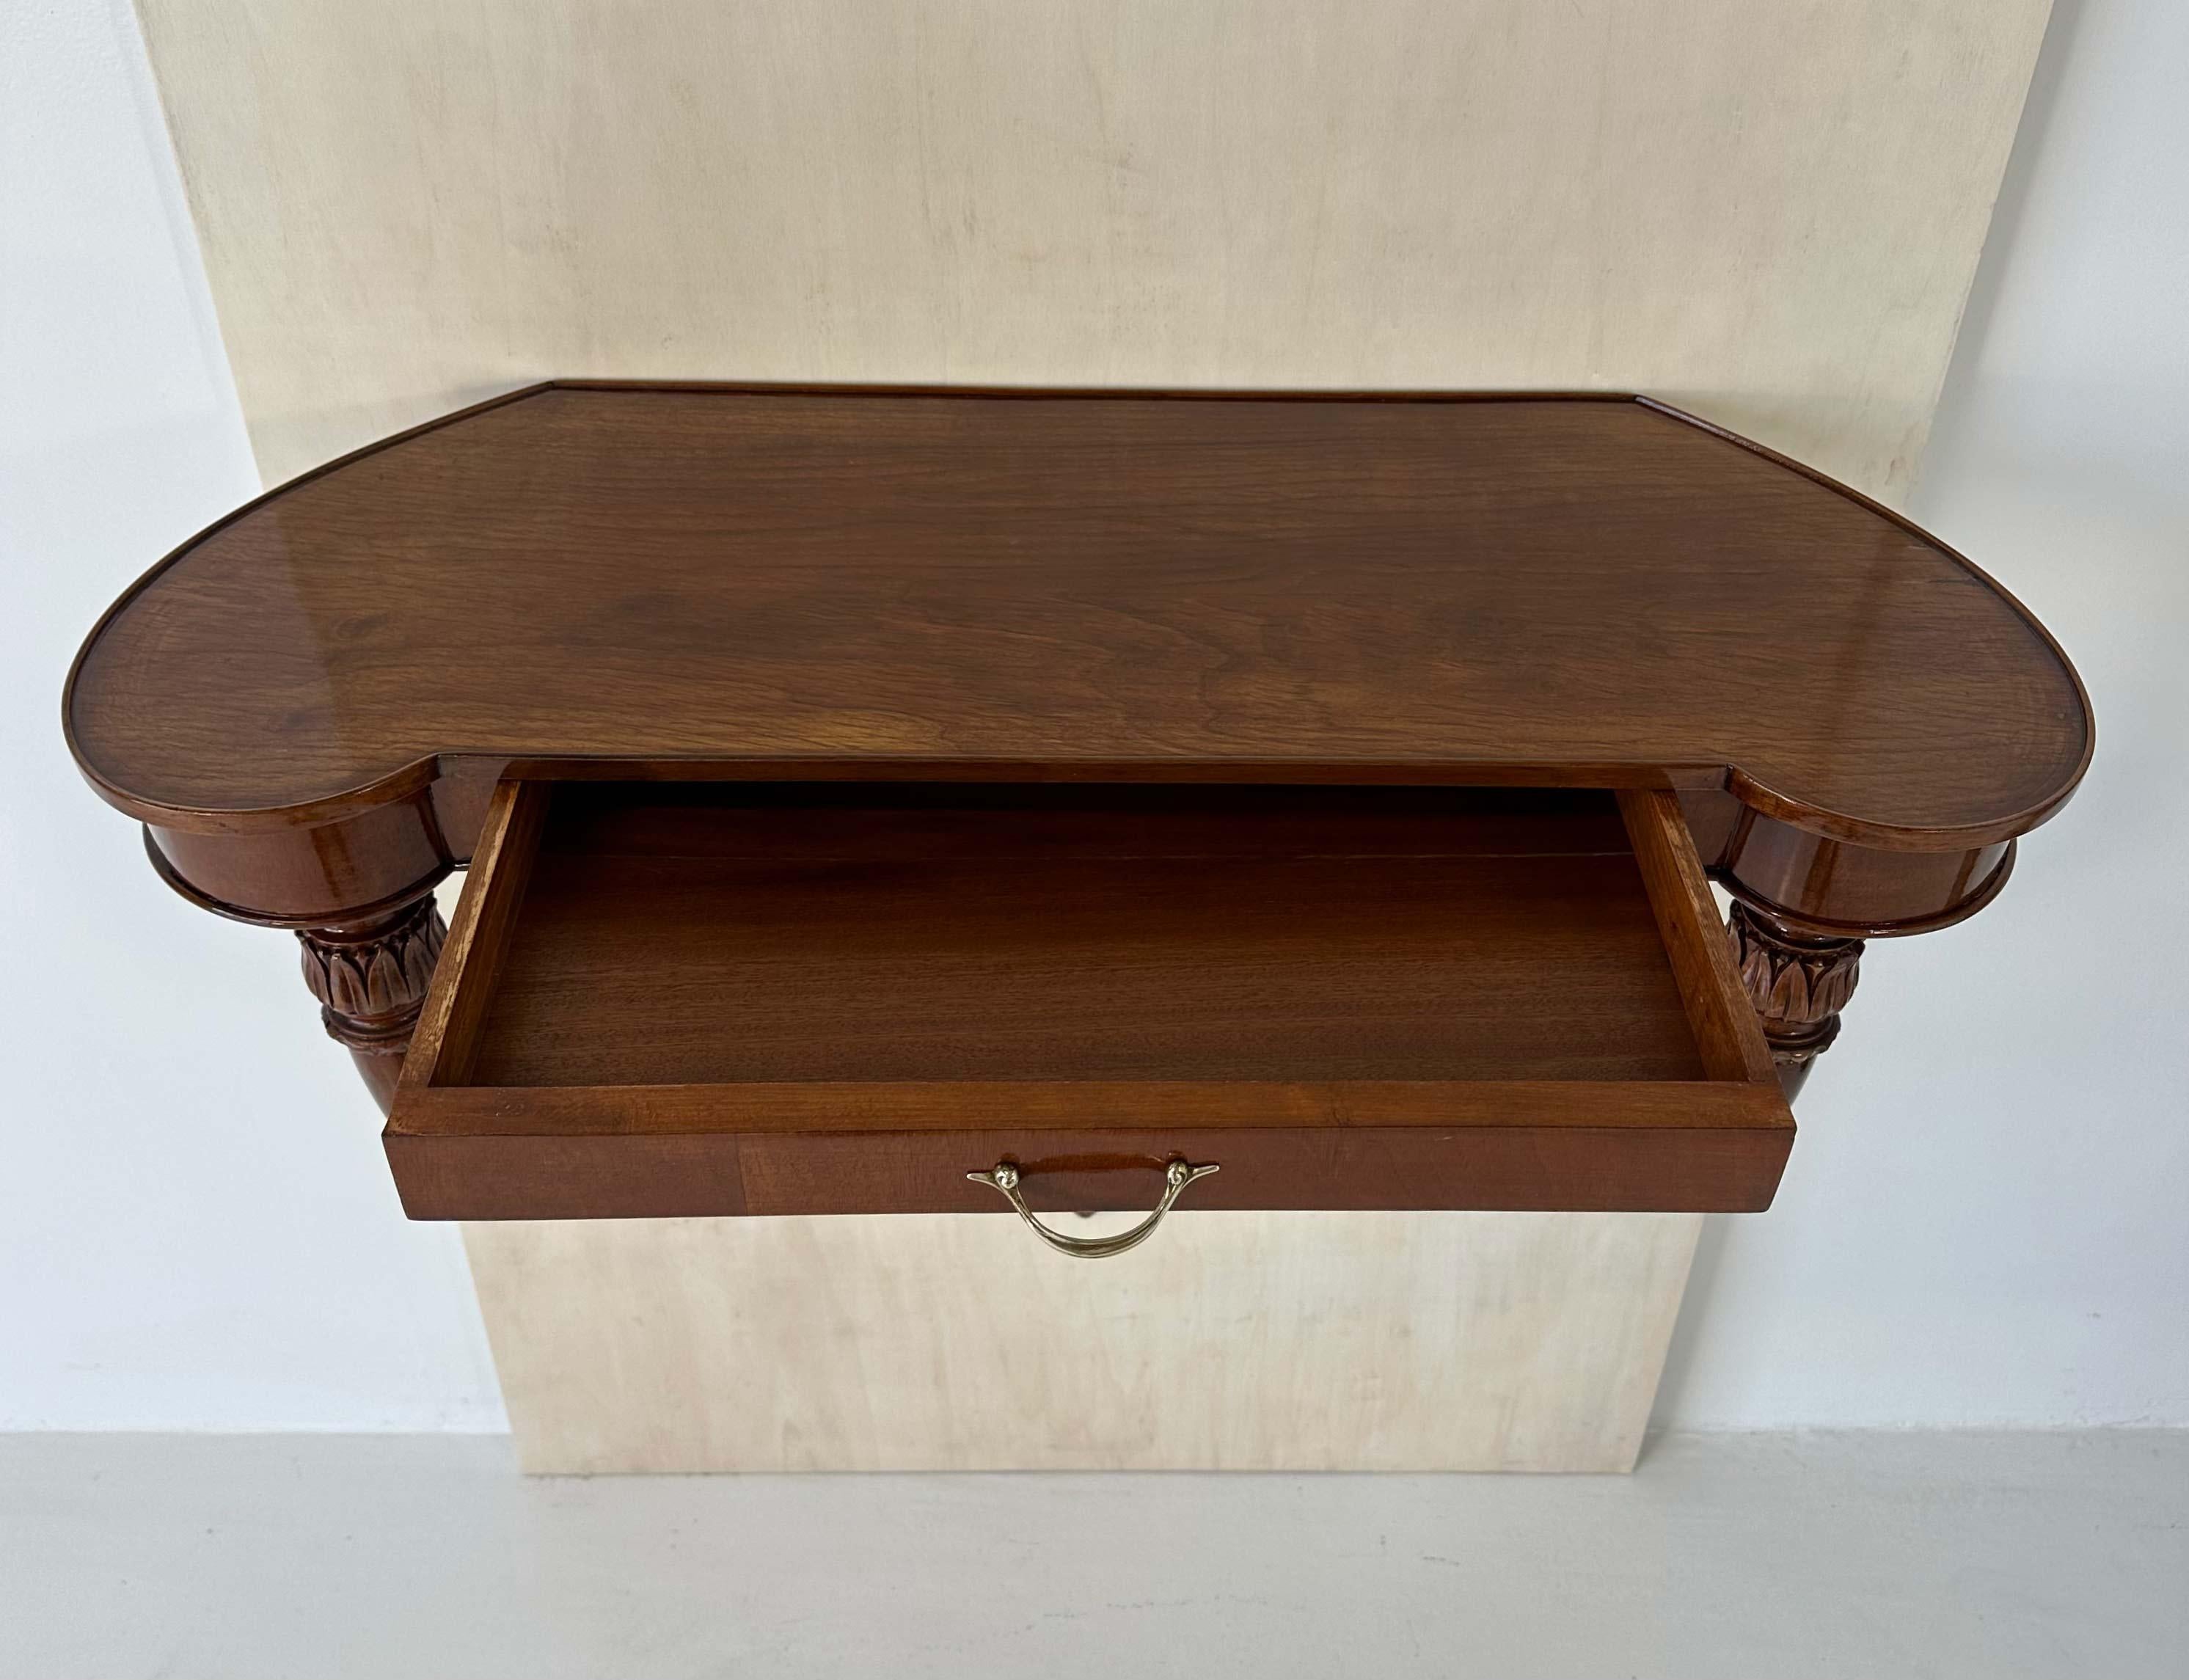 Italian Art Deco Walnut Hanging Console Table, 1930s For Sale 4